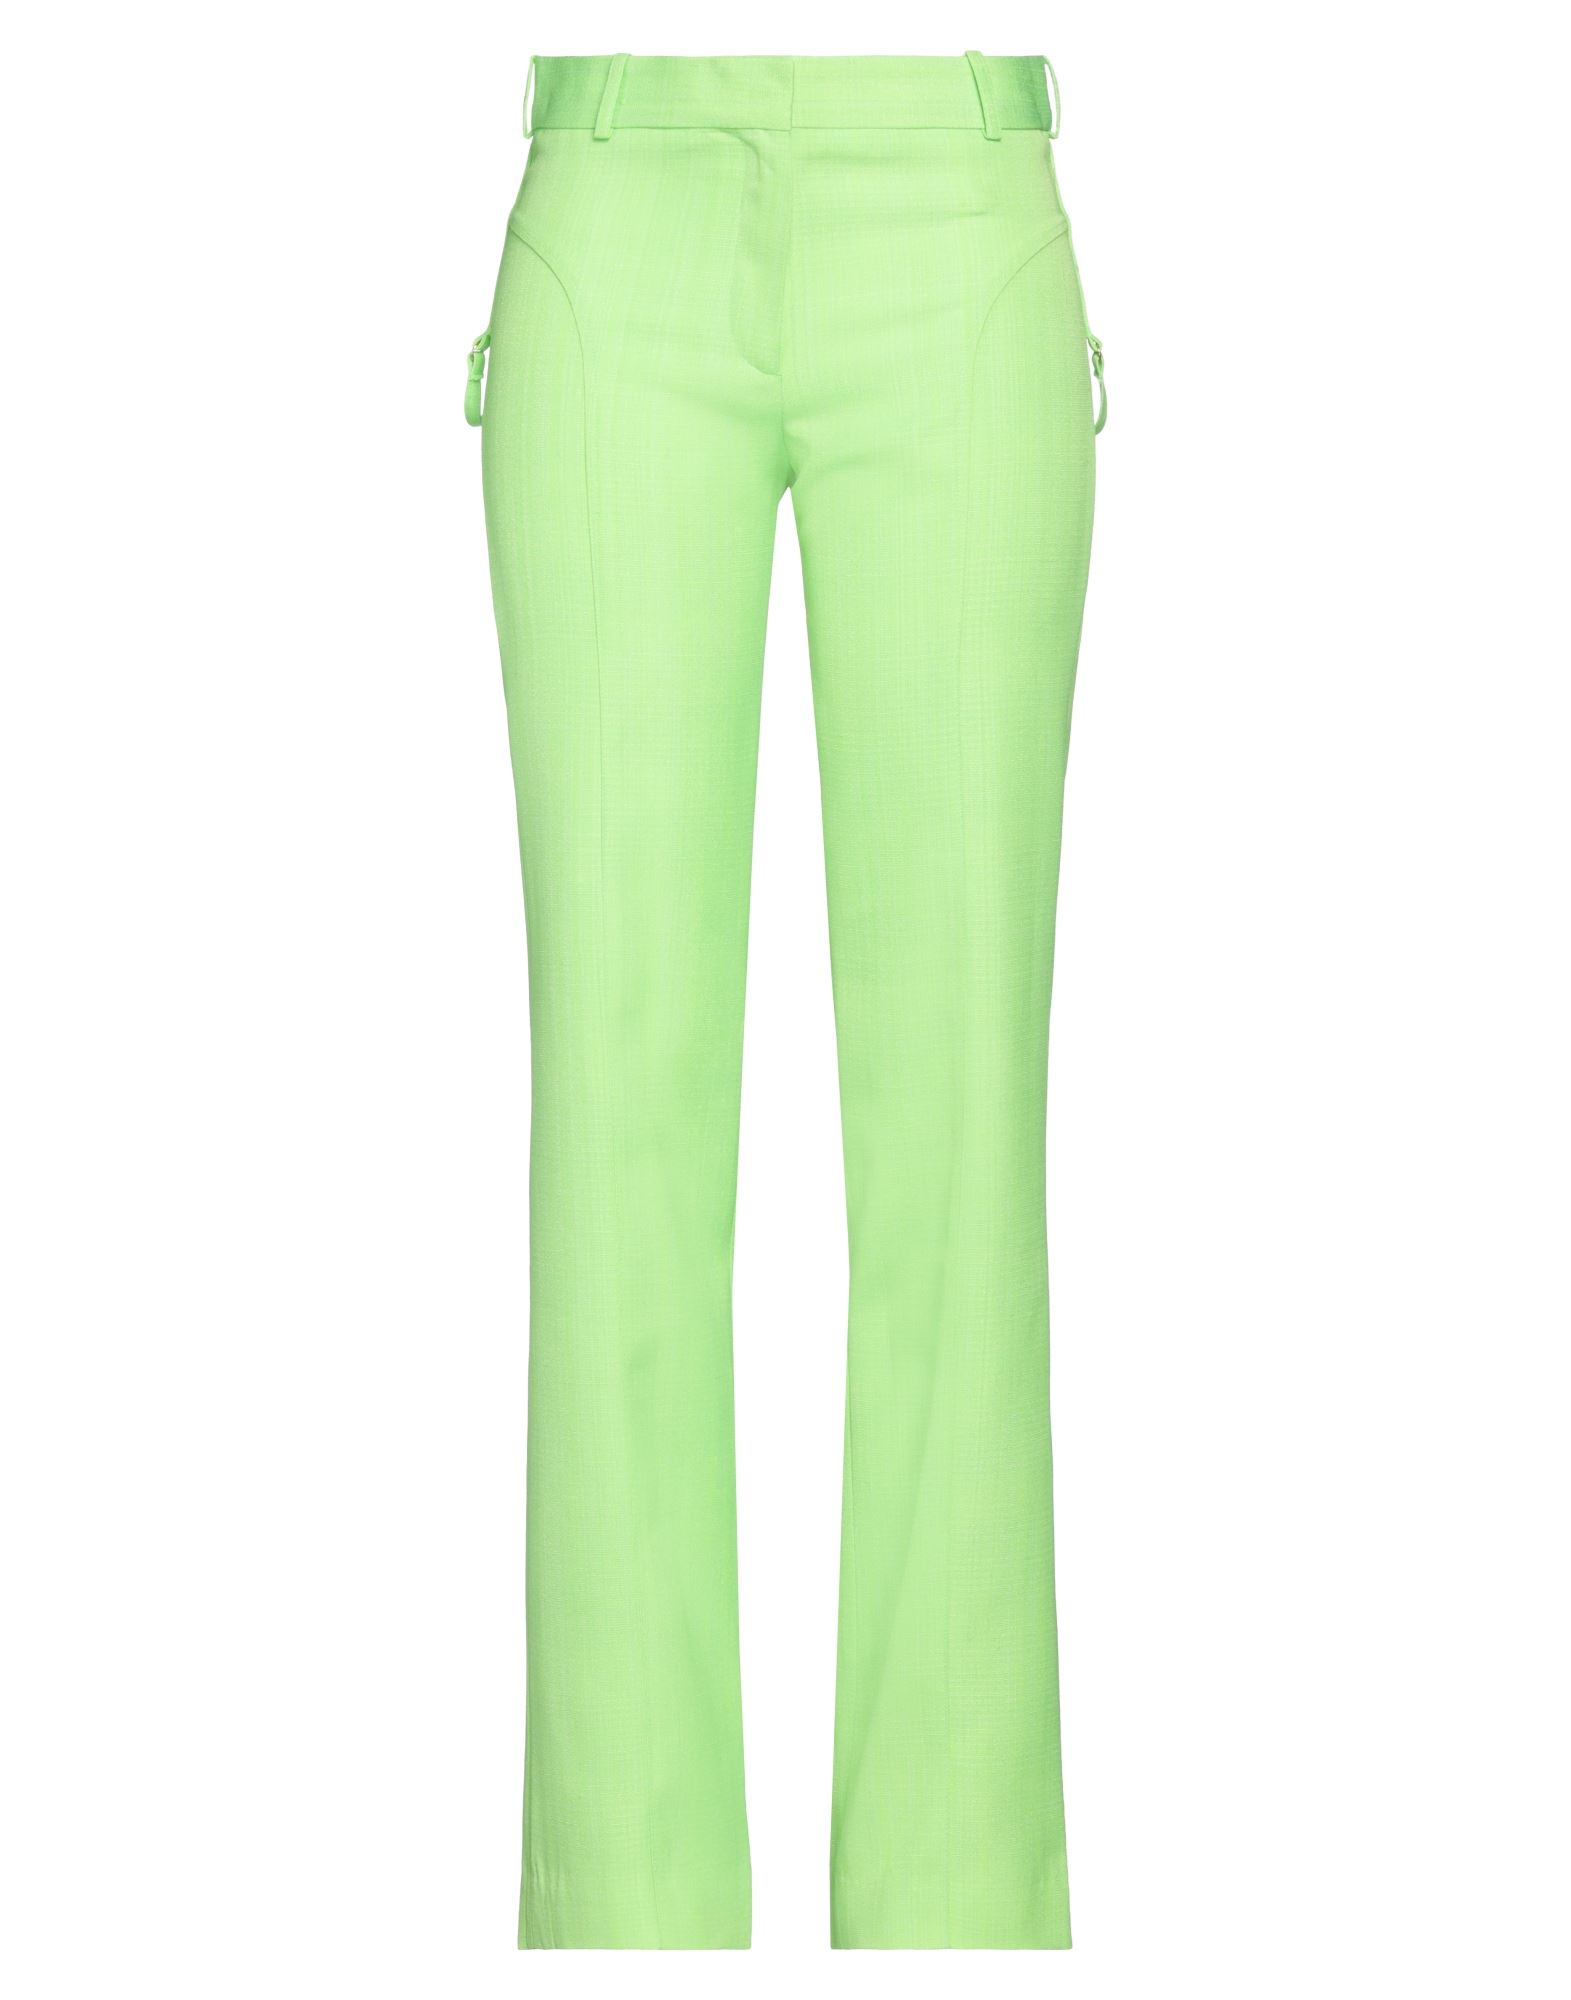 Flared Viscose Pants - Lime green - Ladies